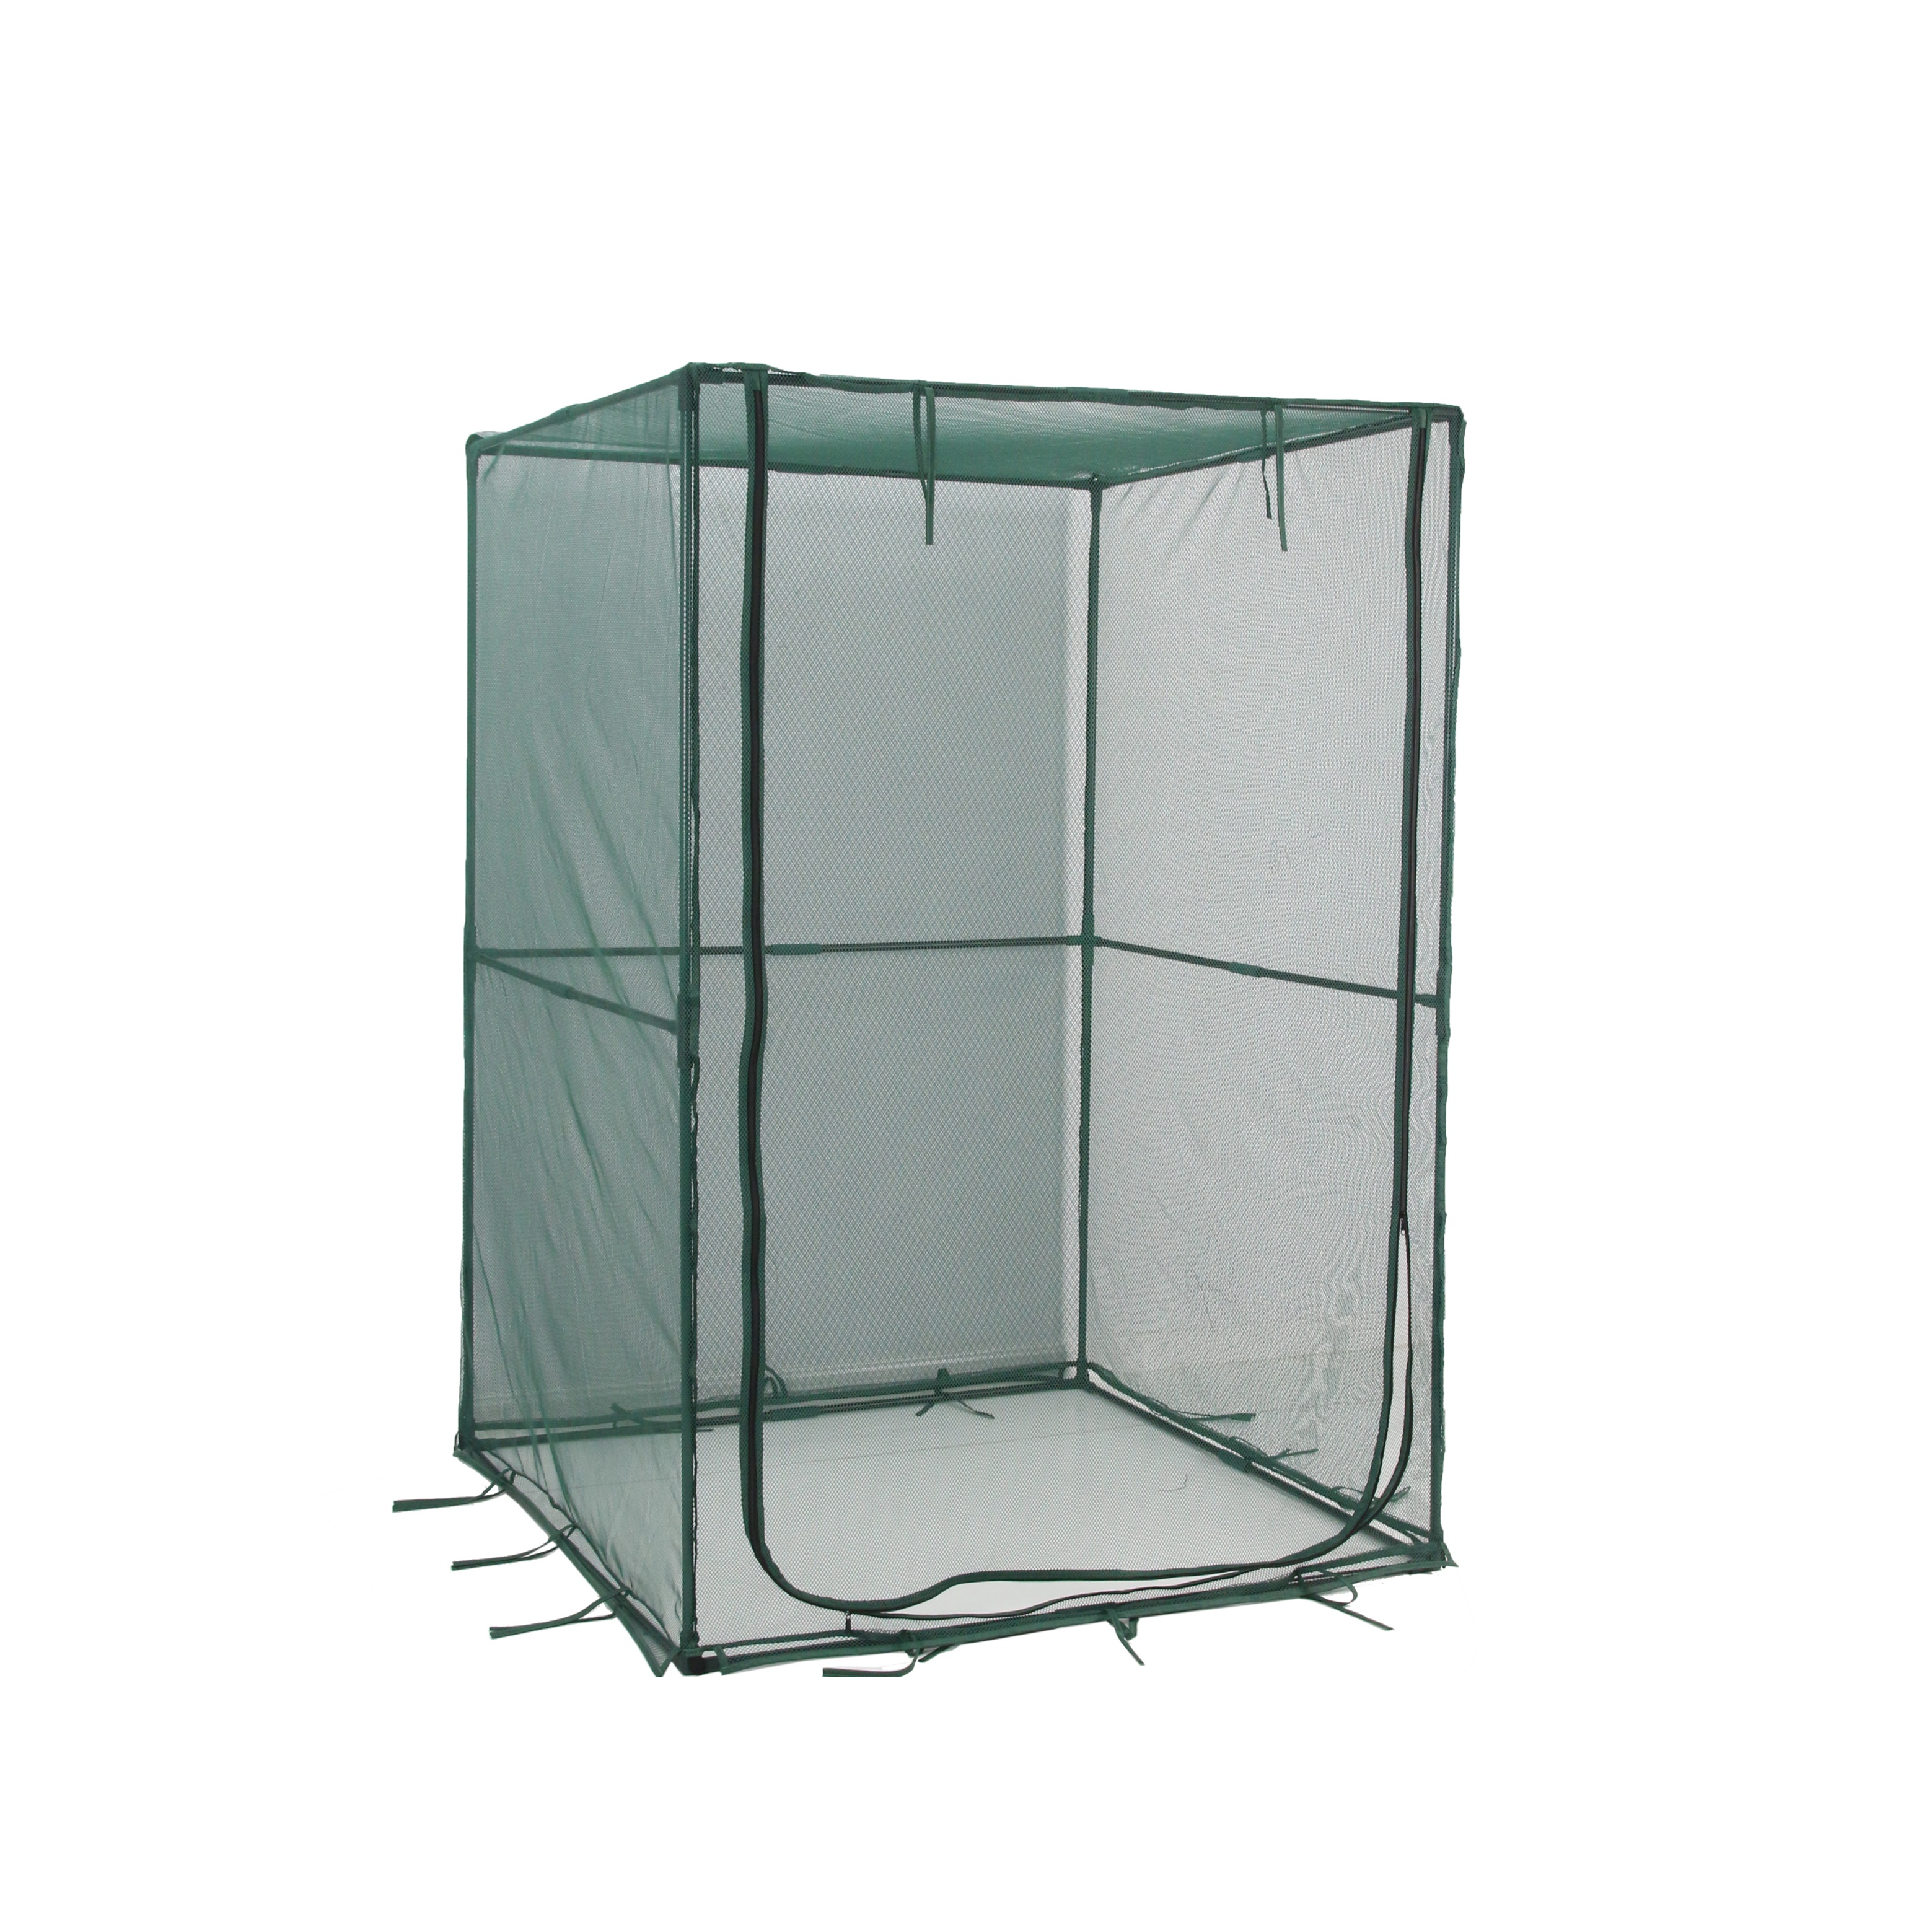 TALL NET Crop Protection Cage – 1.25m2 x 1.8m High